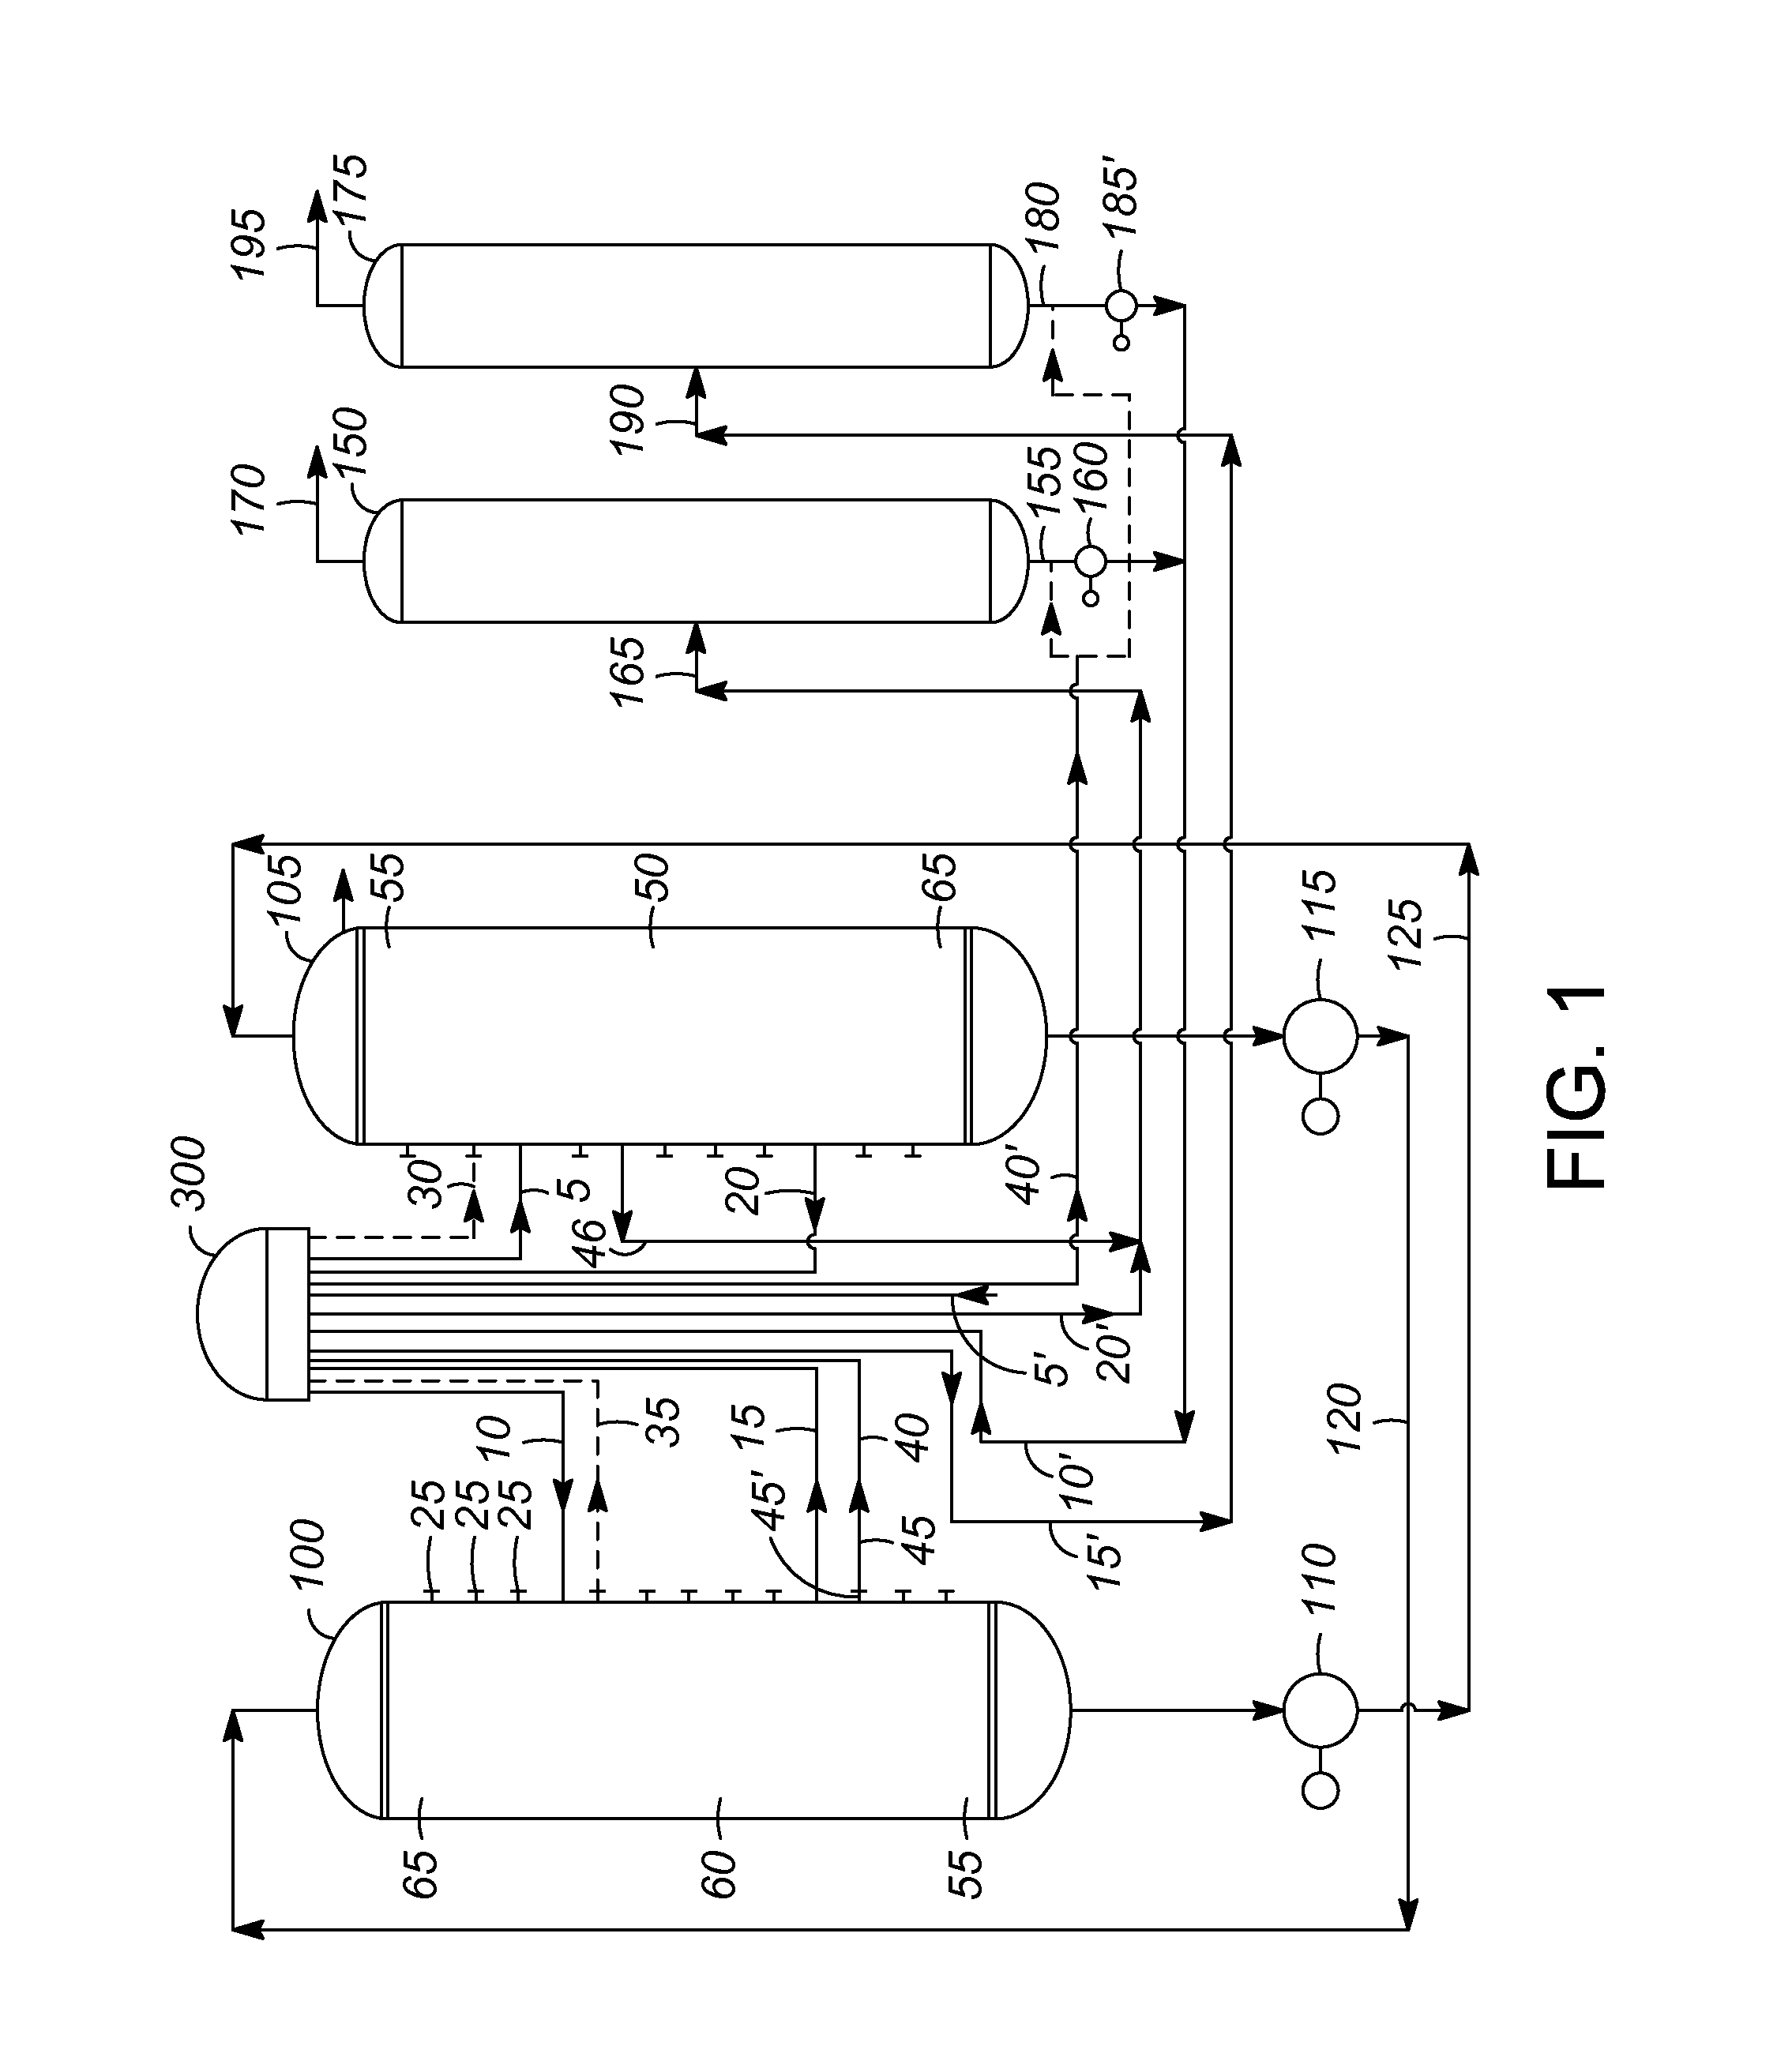 System and process for recovering products using simulated-moving-bed adsorption